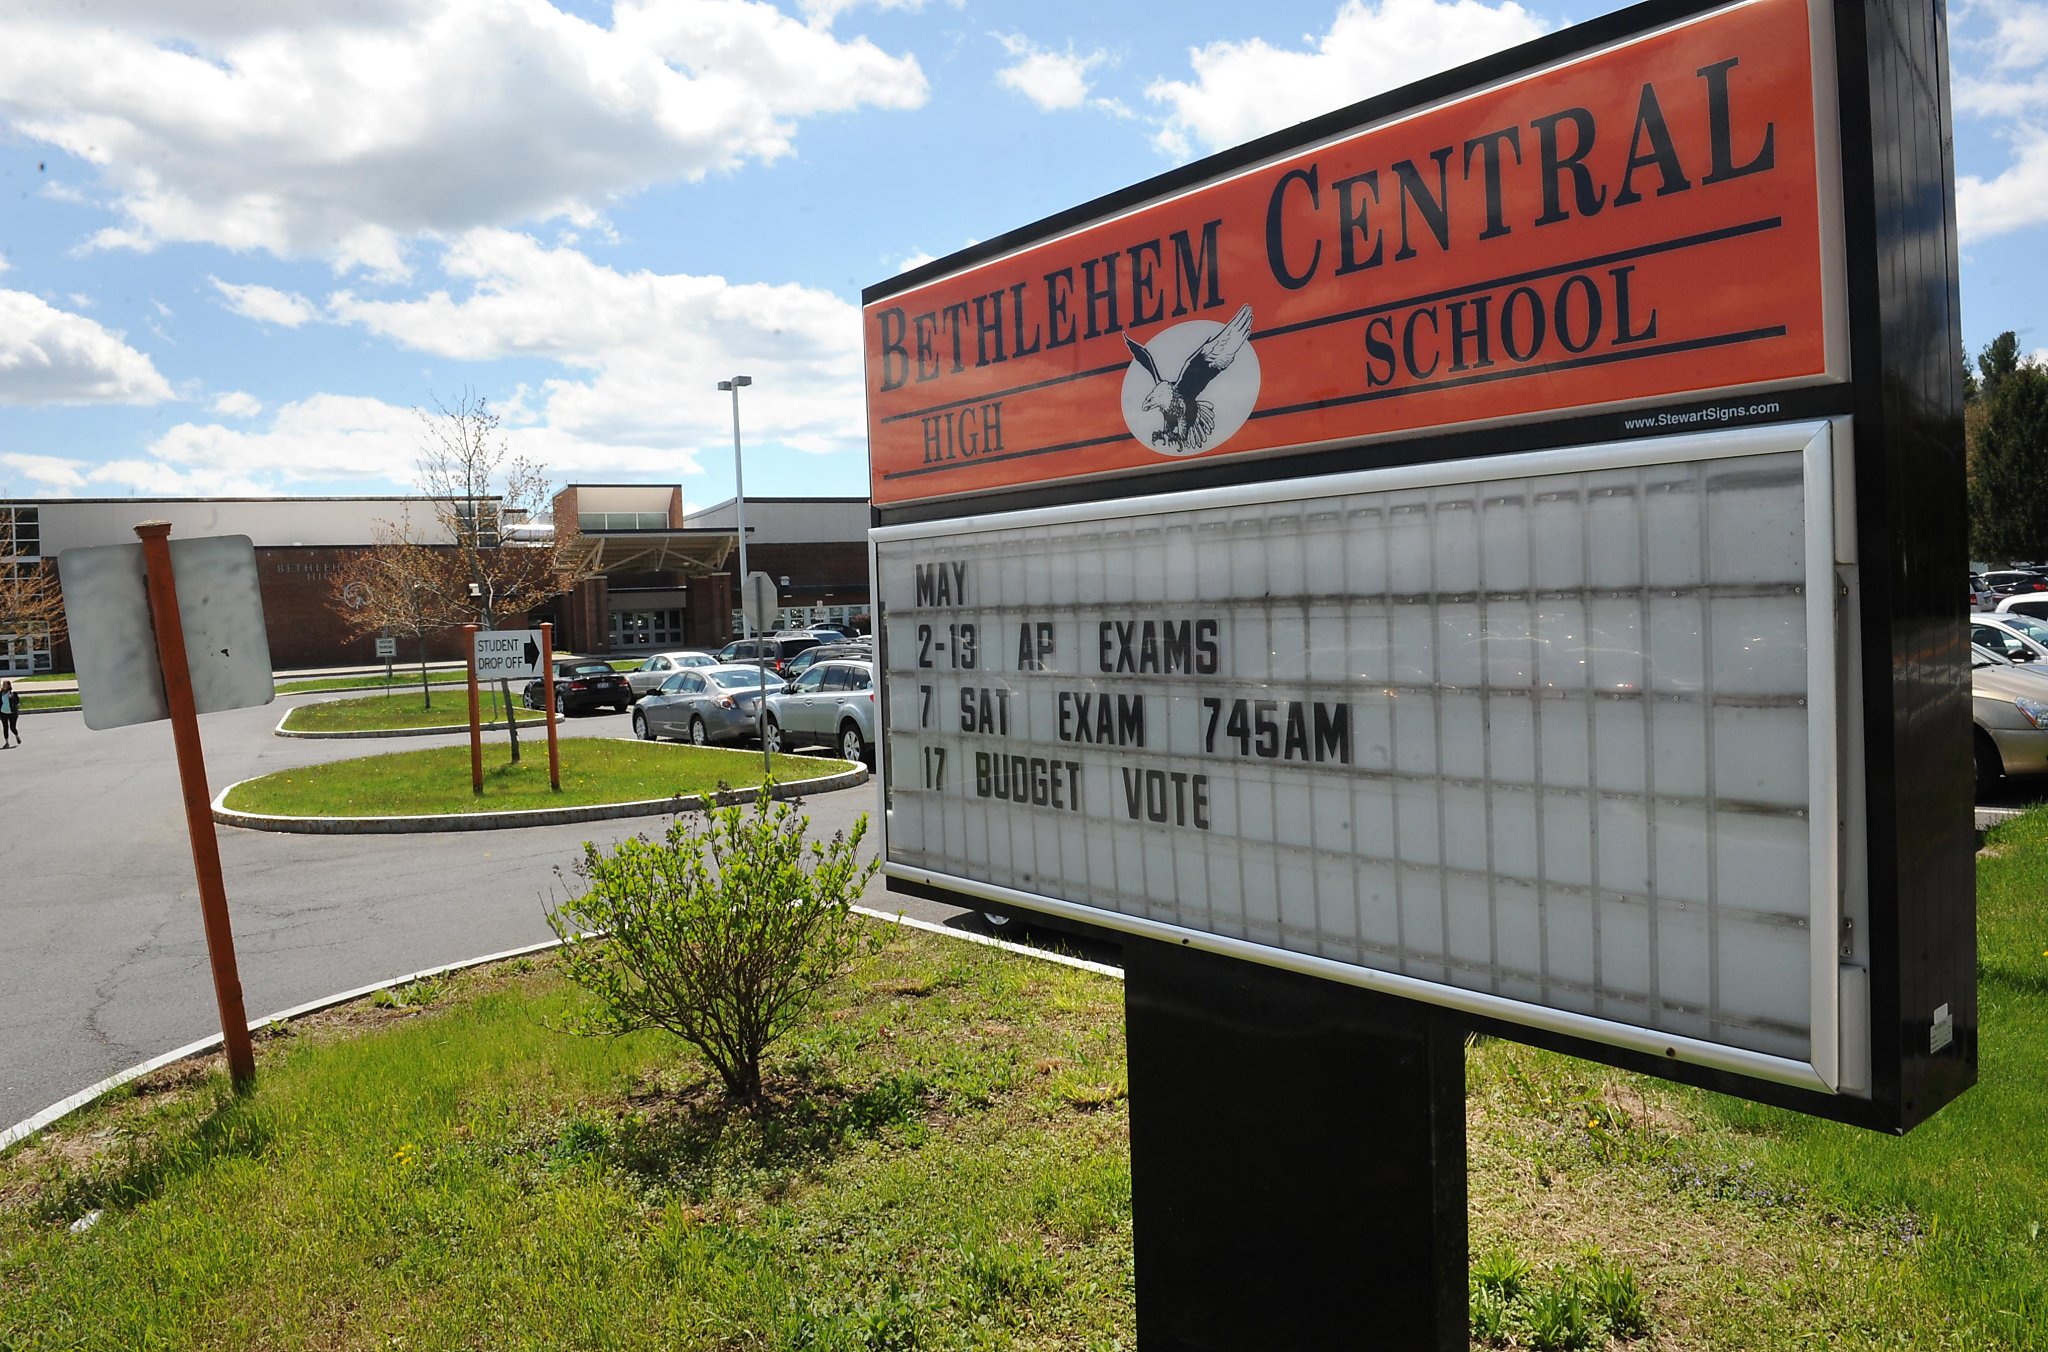 Bethlehem principal says he was put on leave after finding flaws in